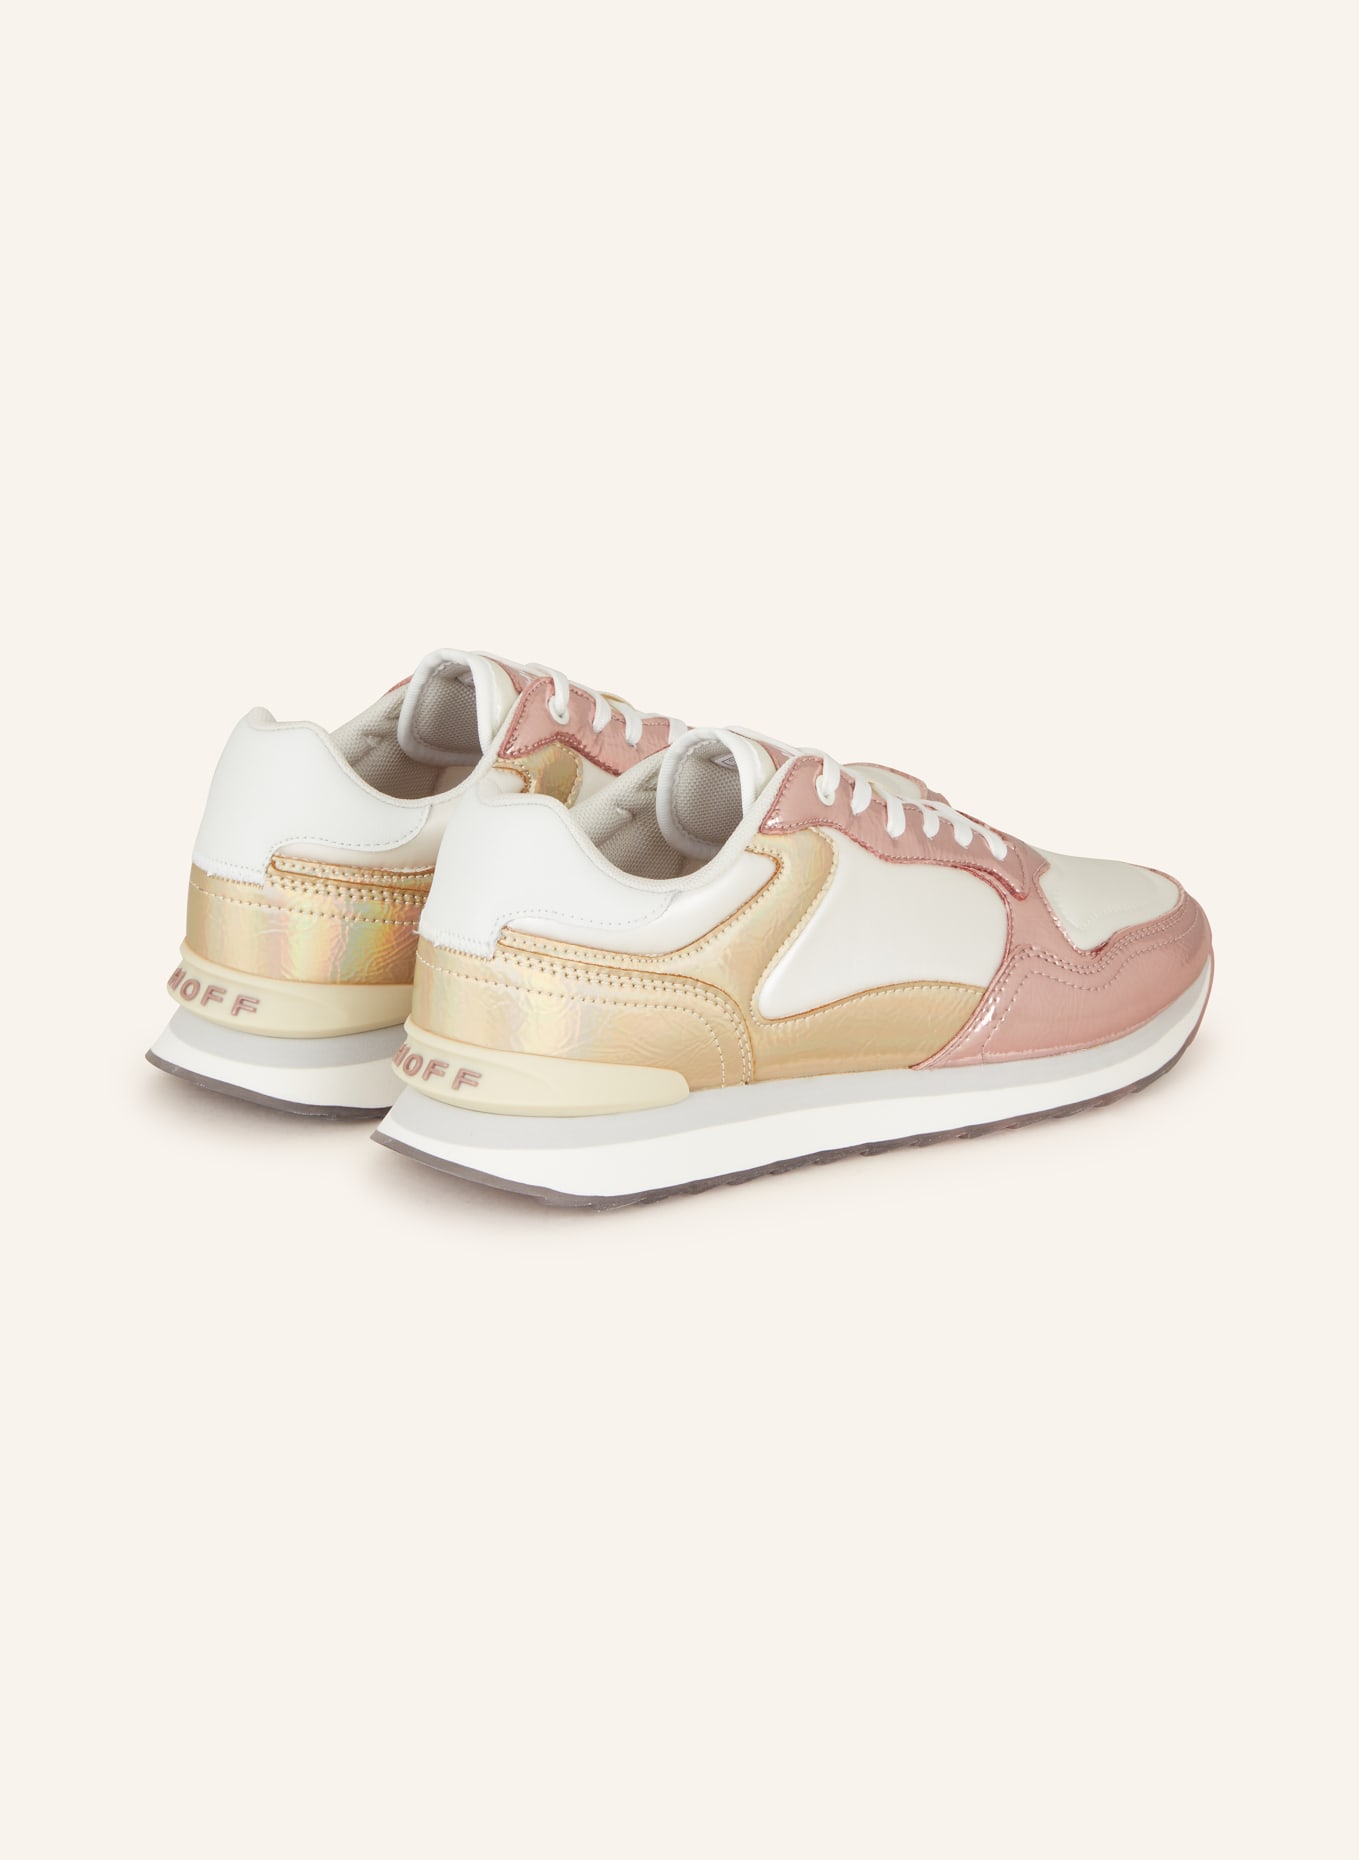 HOFF Sneakers COPPER, Color: PINK/ GOLD/ WHITE (Image 2)